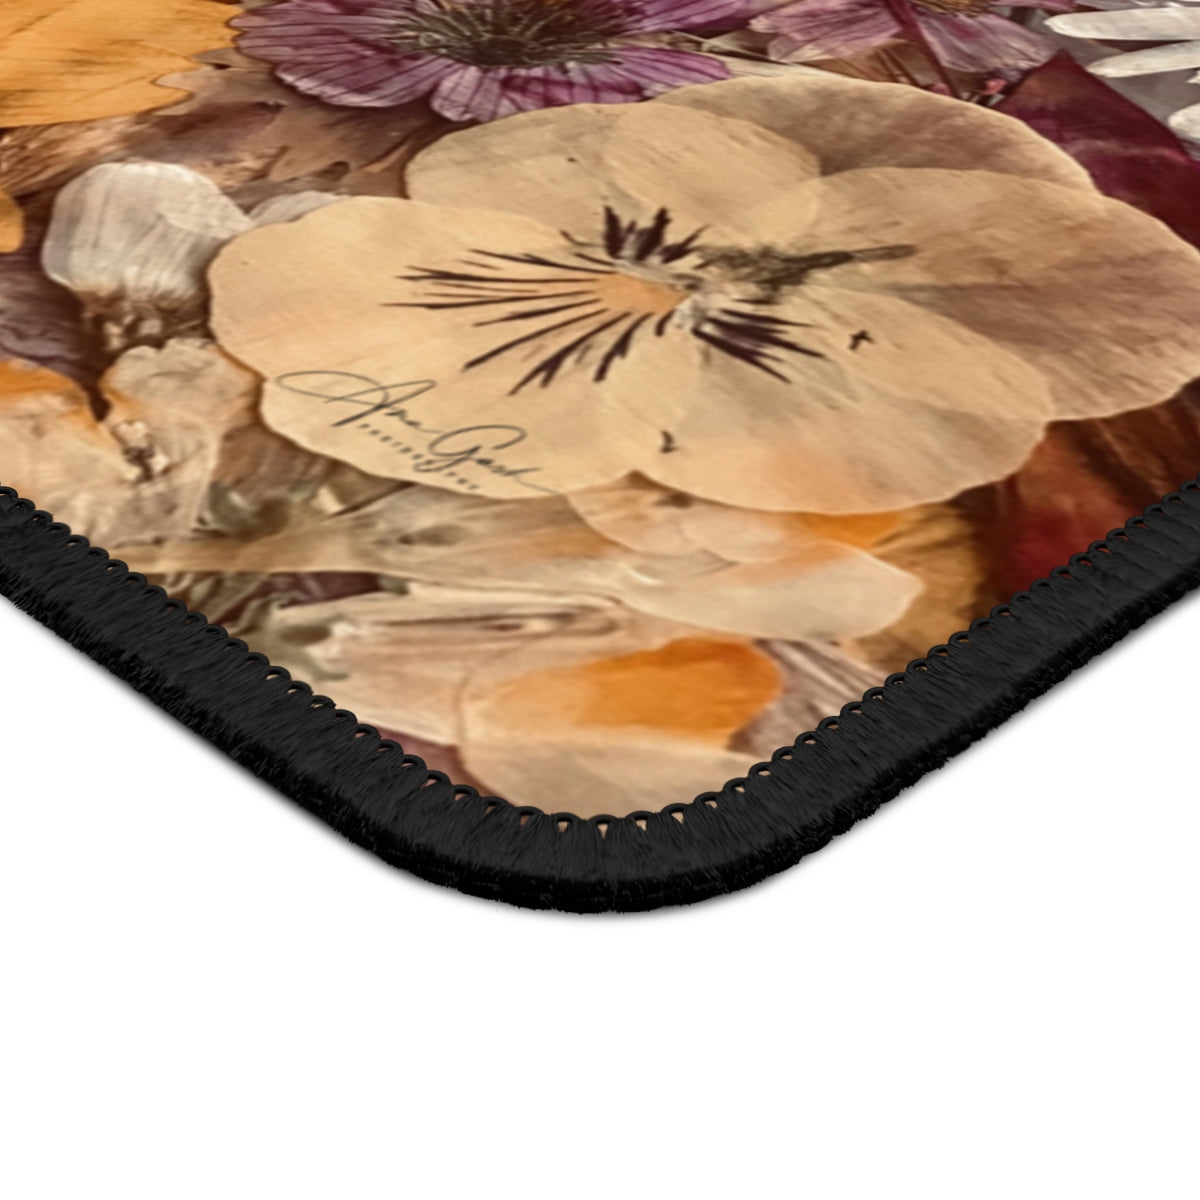 Pressed Flower Mouse Pad